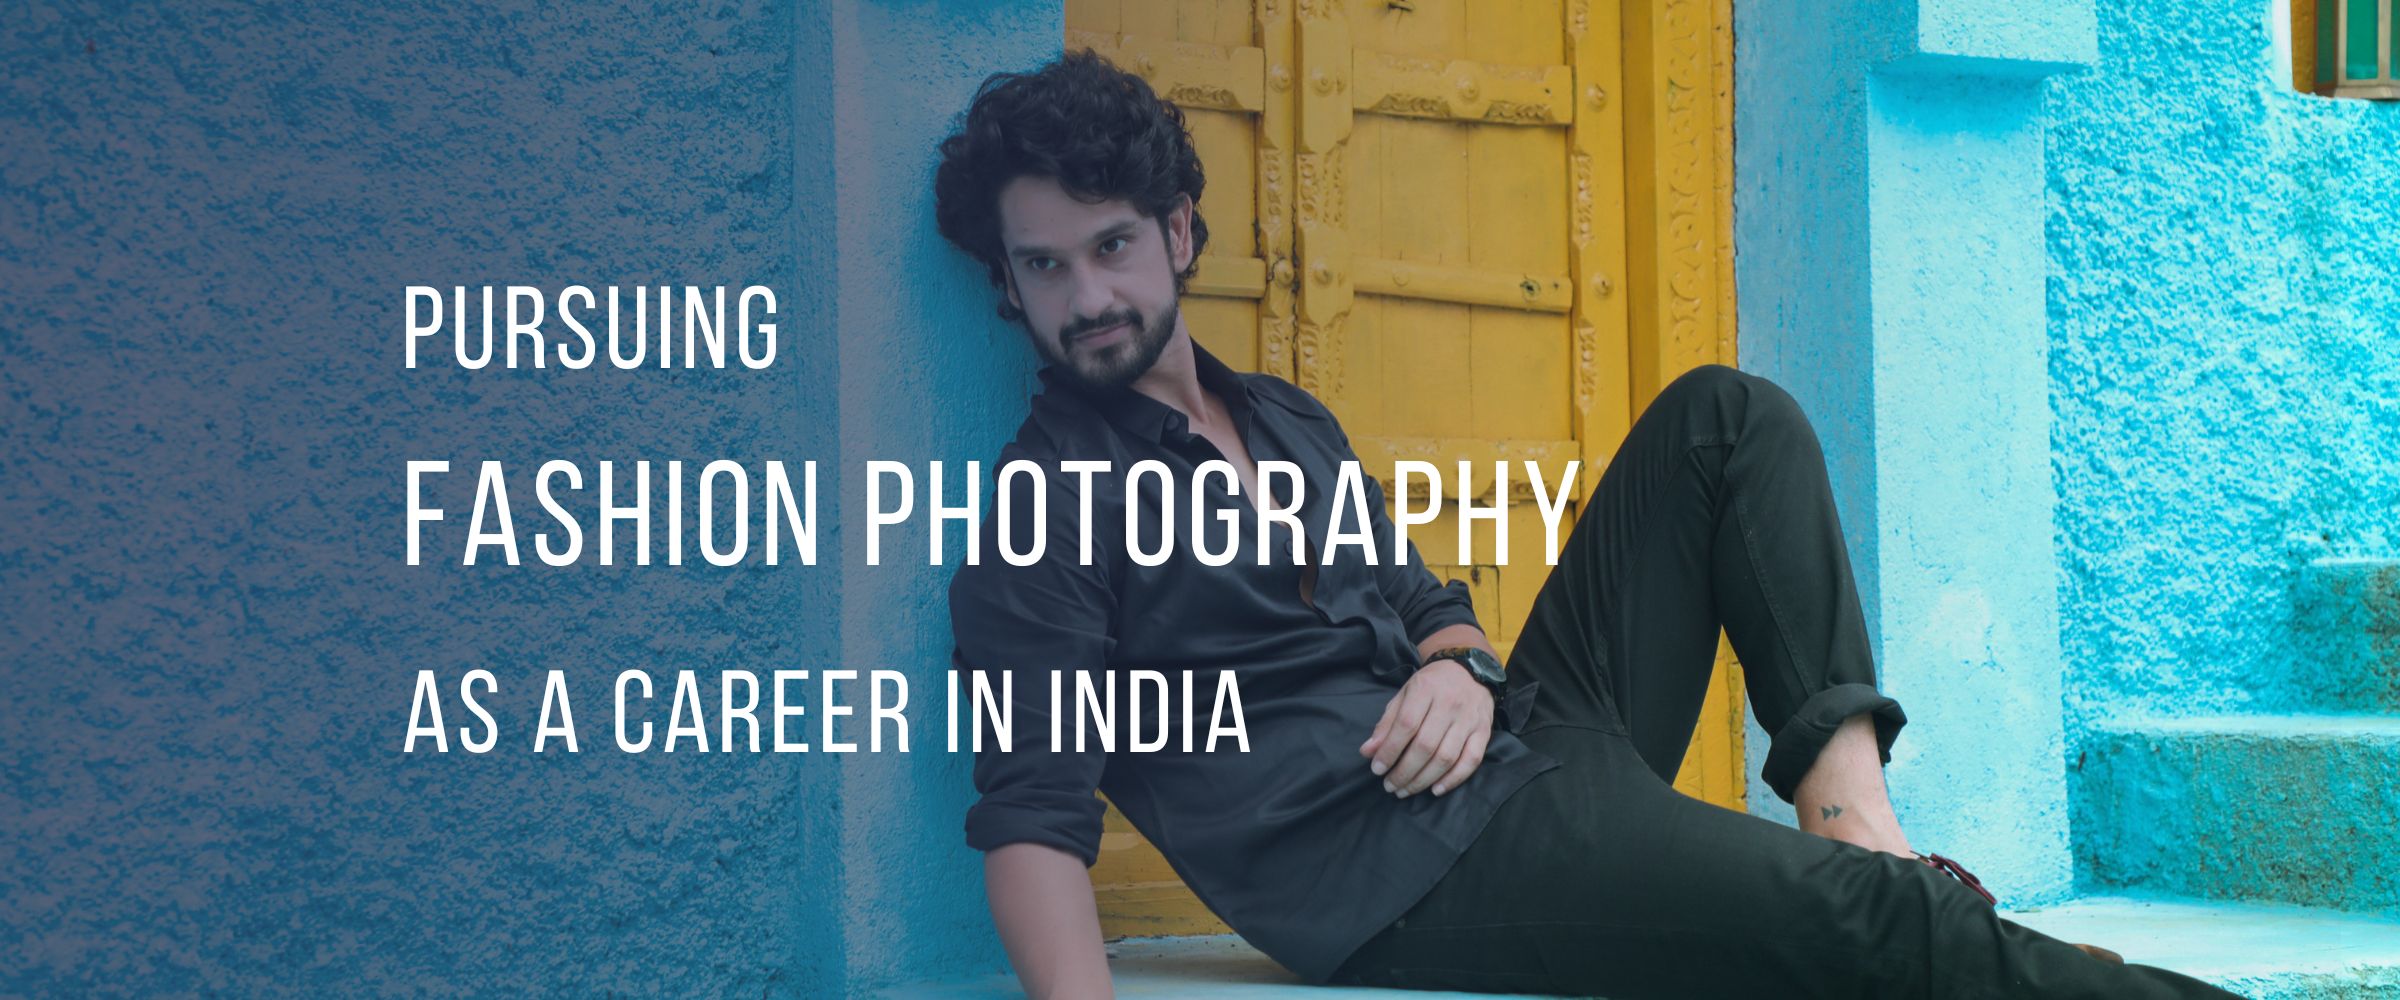 Fashion Photography as a Career